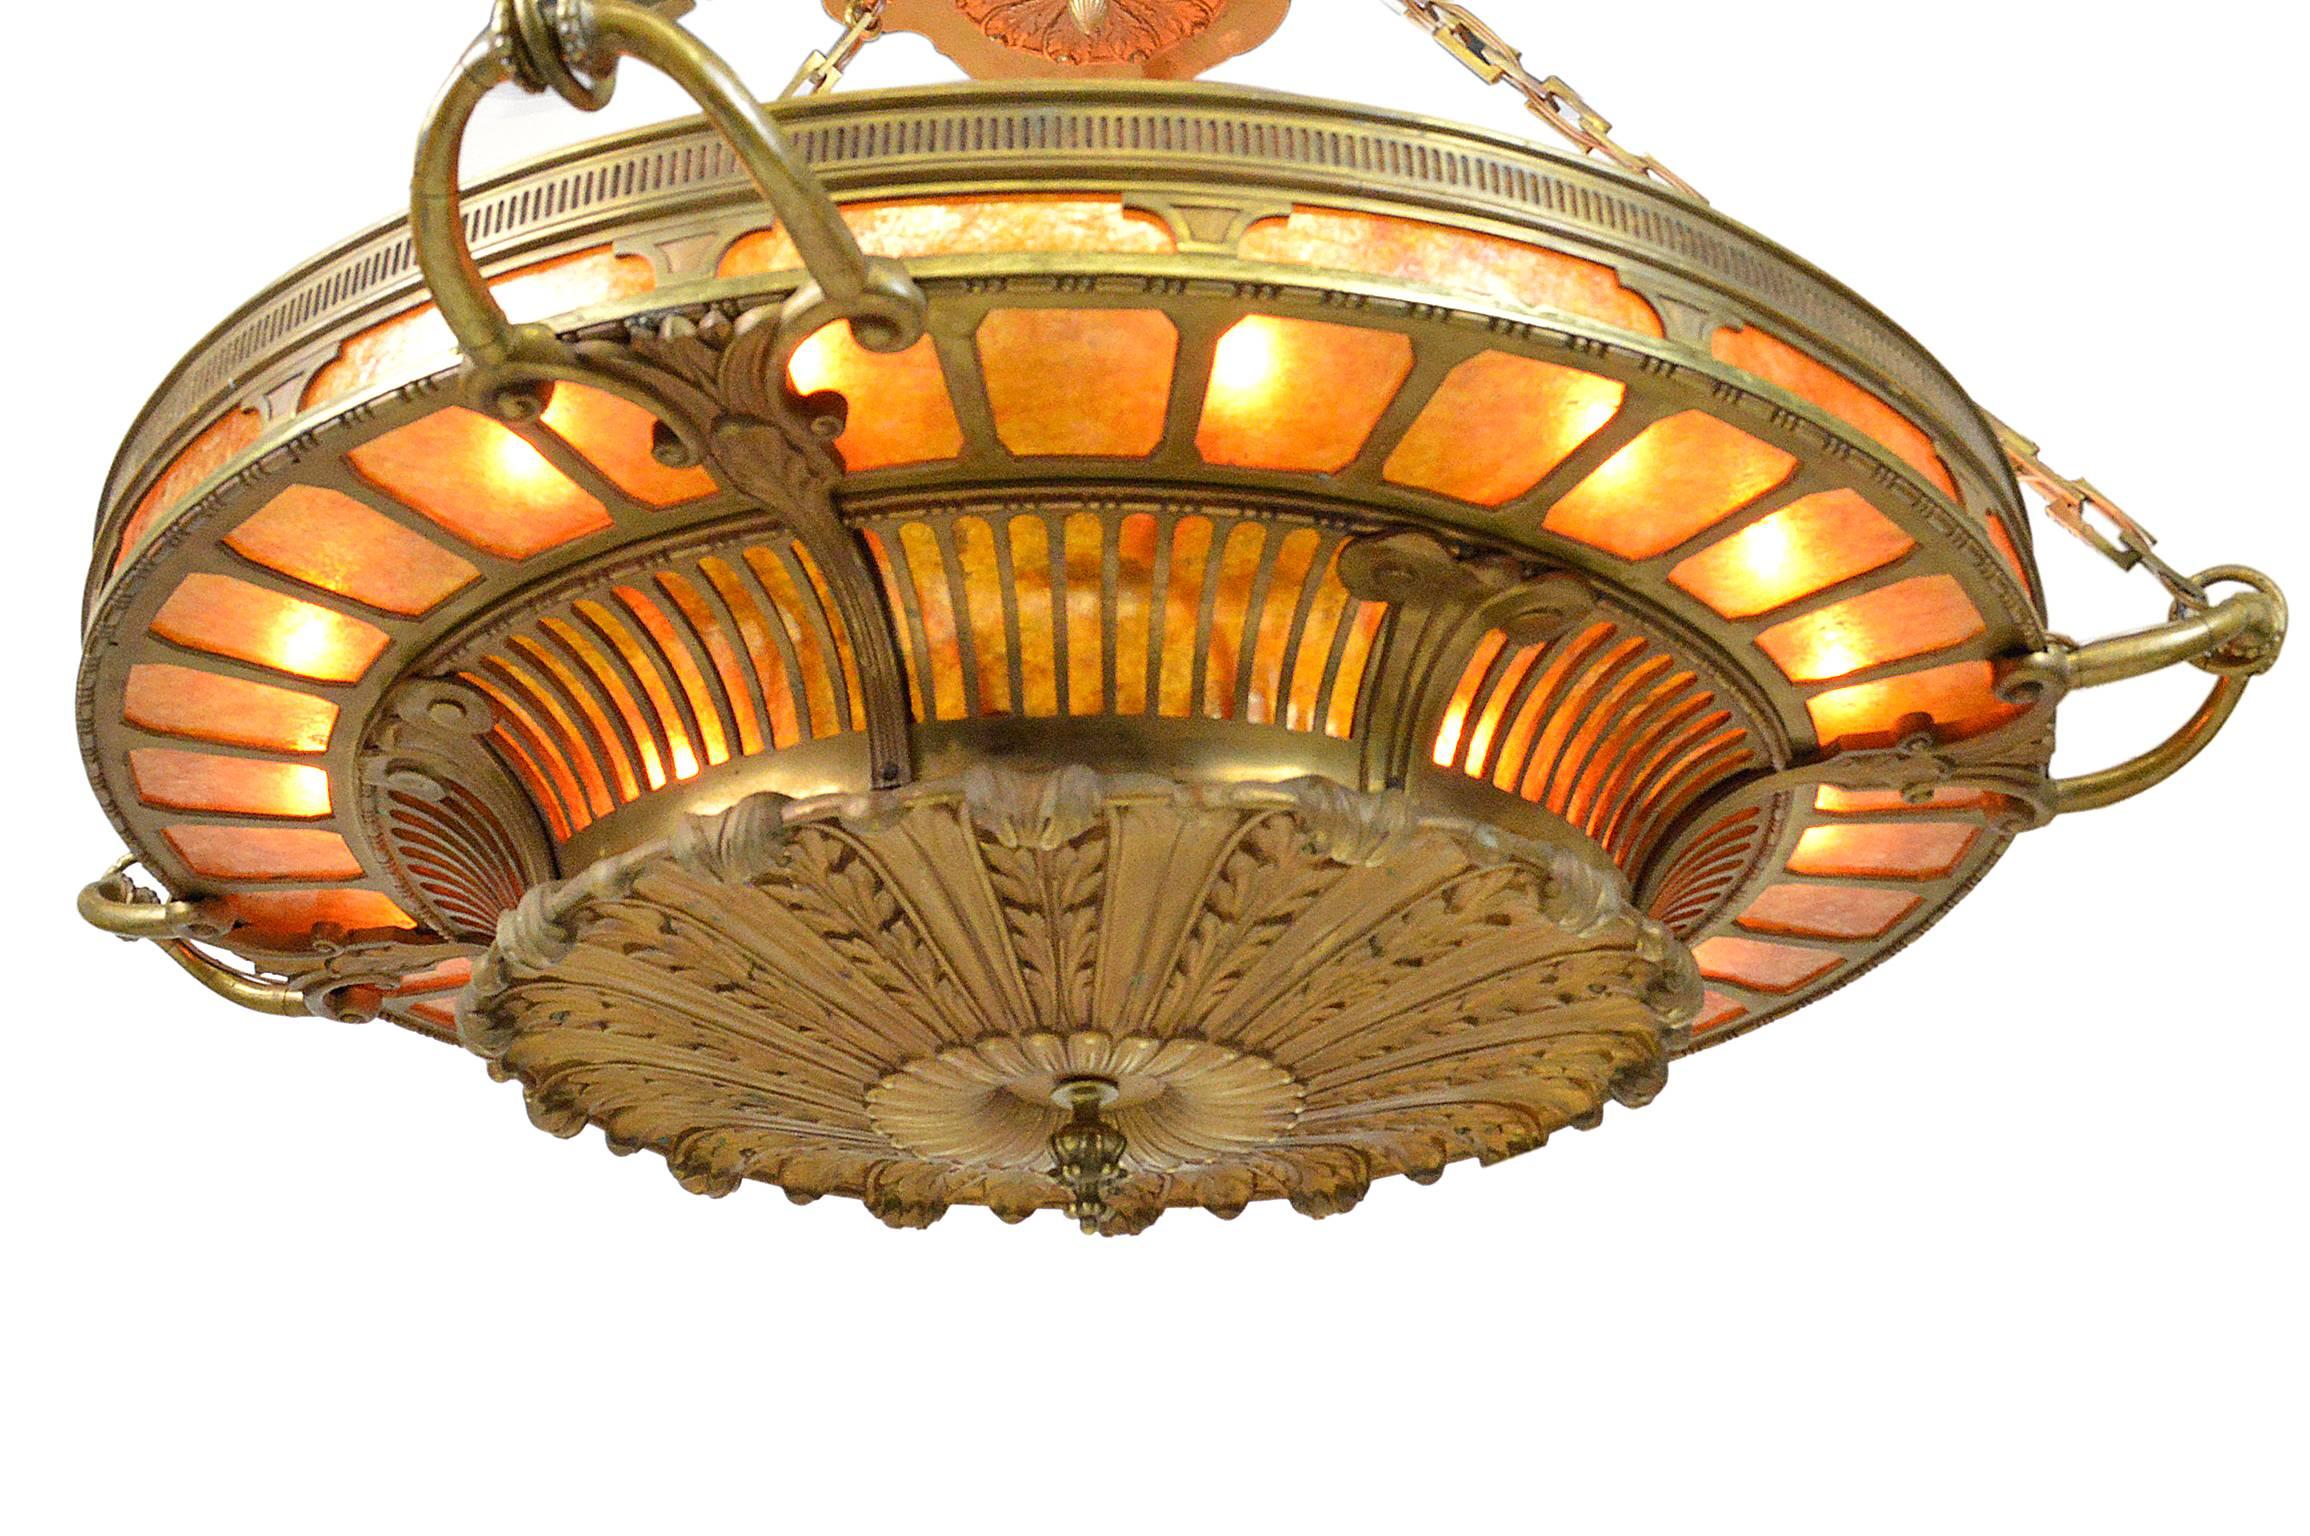 Monumental neoclassical style bronze and mica chandelier by Mitchell Vance, New York, circa 1910. Beautiful original patina throughout, newly rewired. Established in 1854, the Mitchell Vance Company was an industry leader in early 20th century